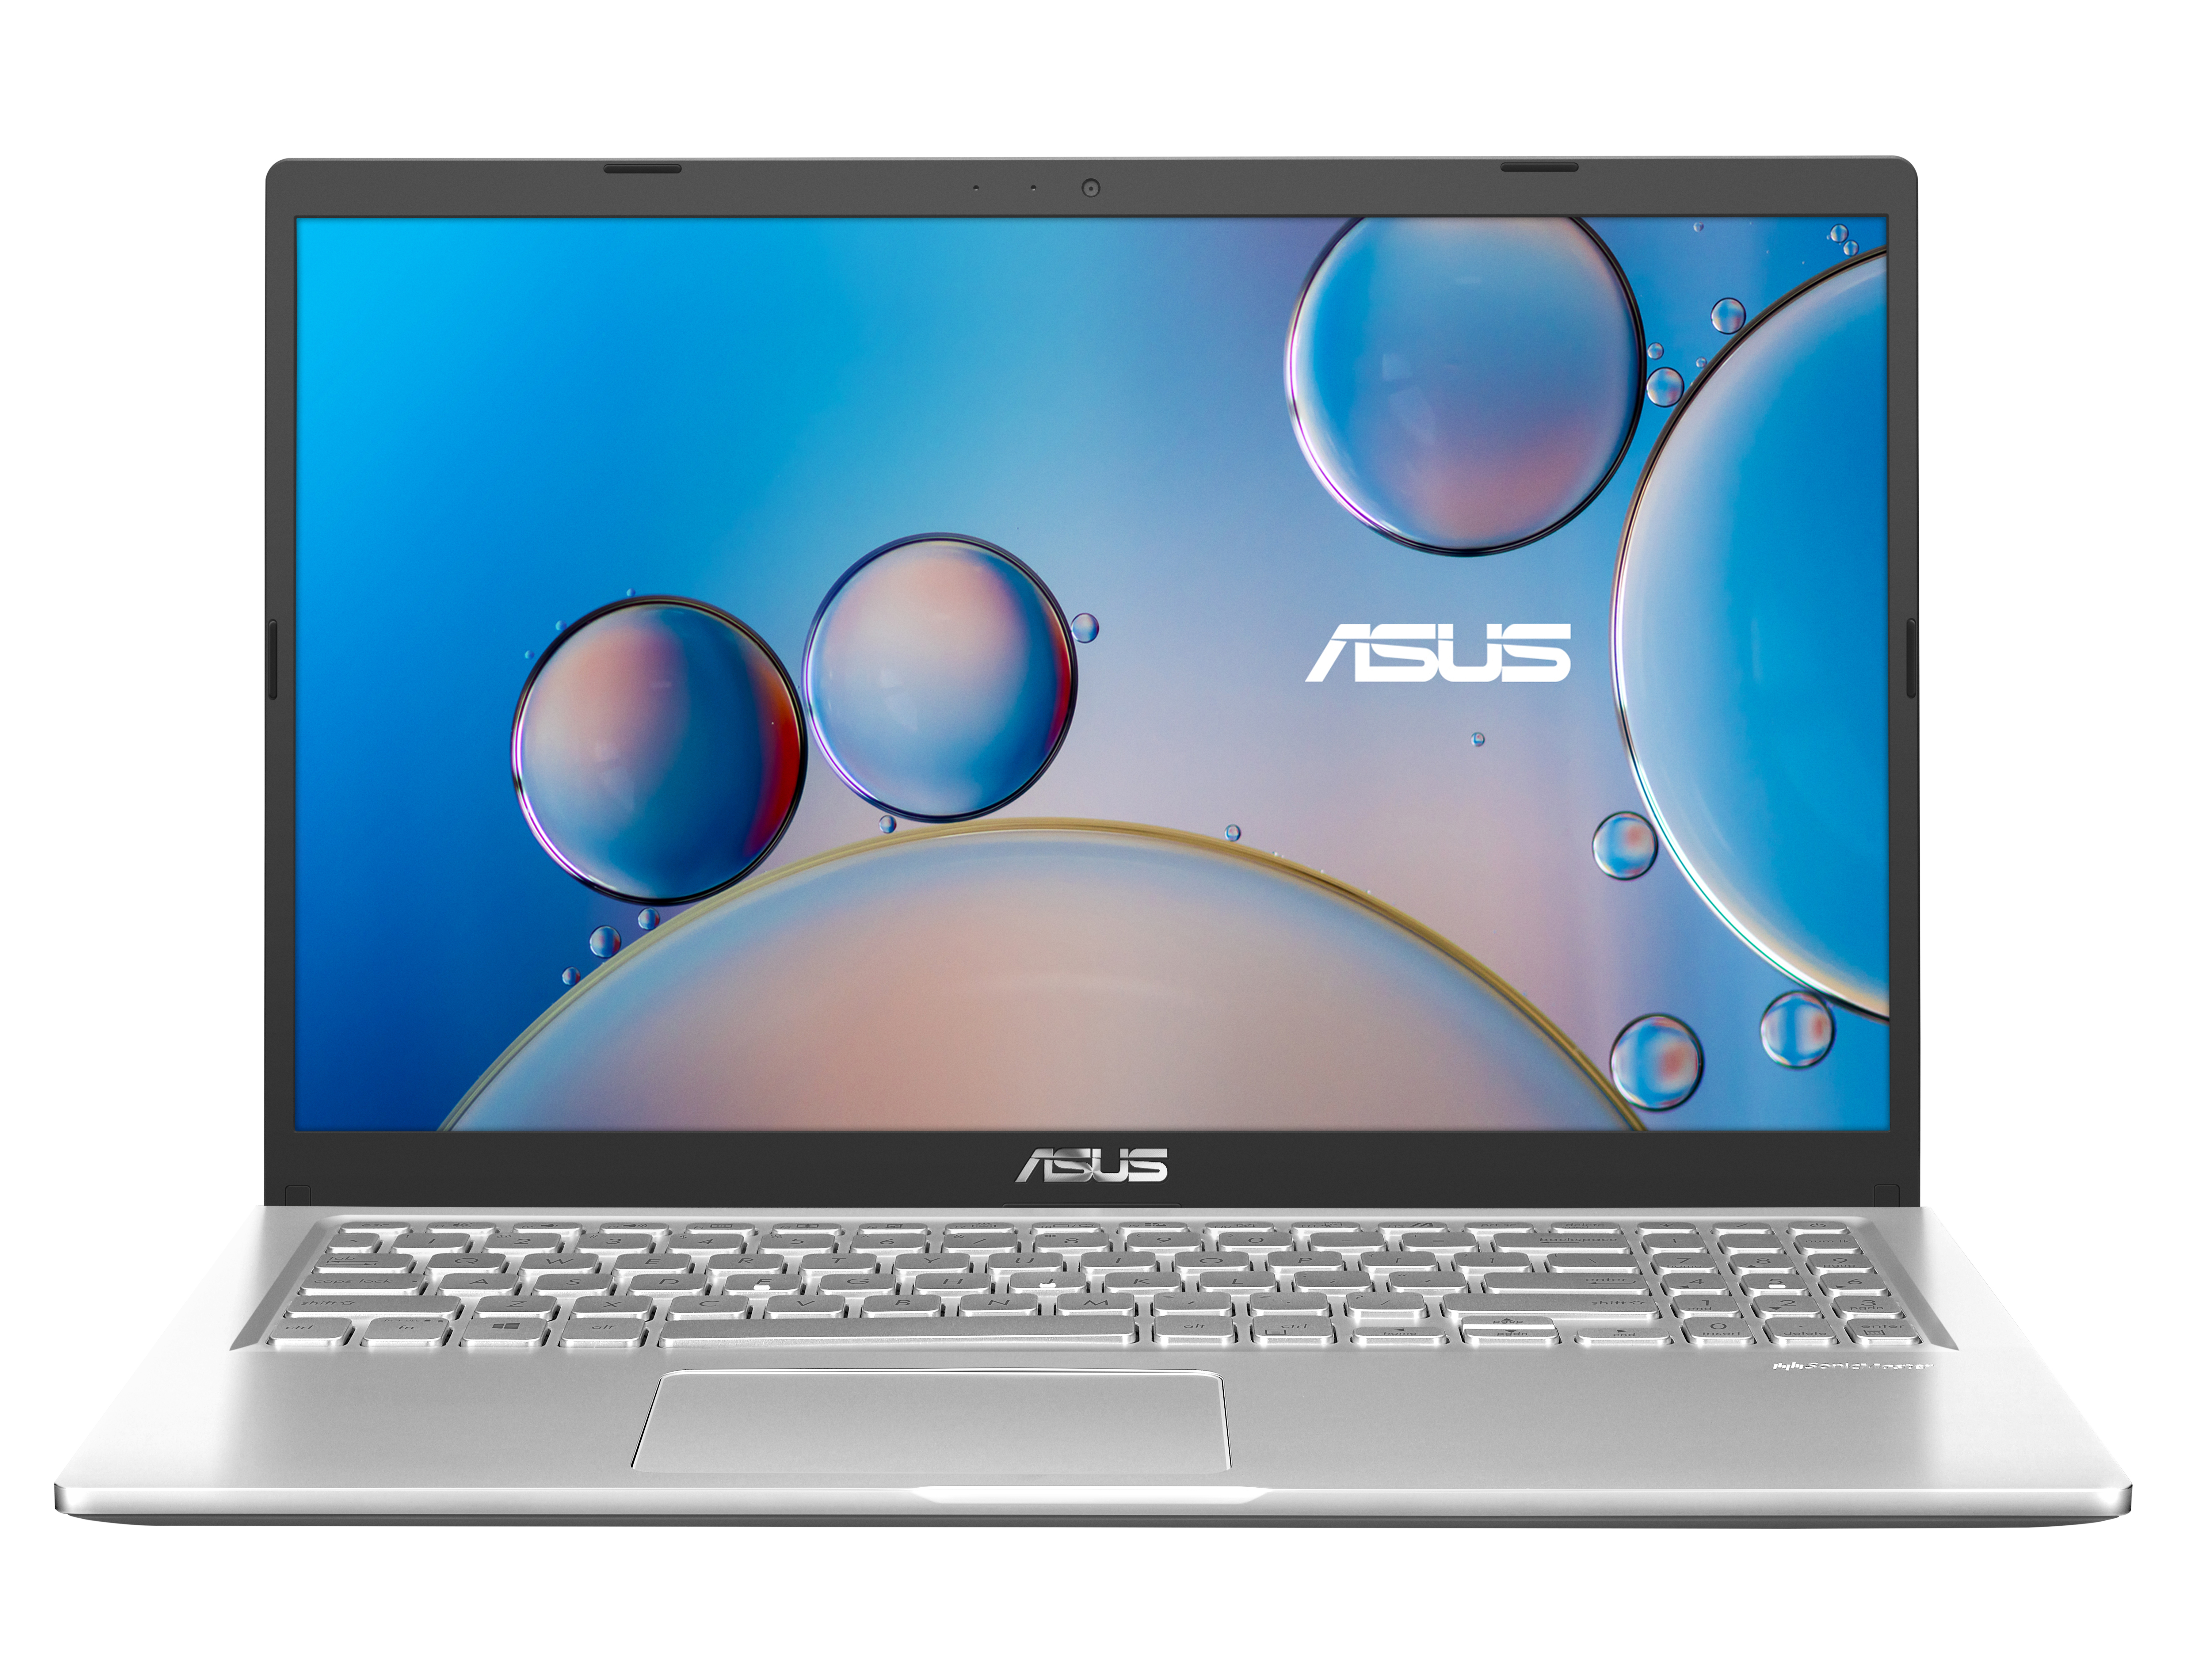 NOTEBOOK ASUS I3-1005G1 /4G /256SSD /HDGRAPH /15.6 /WIN10HOME